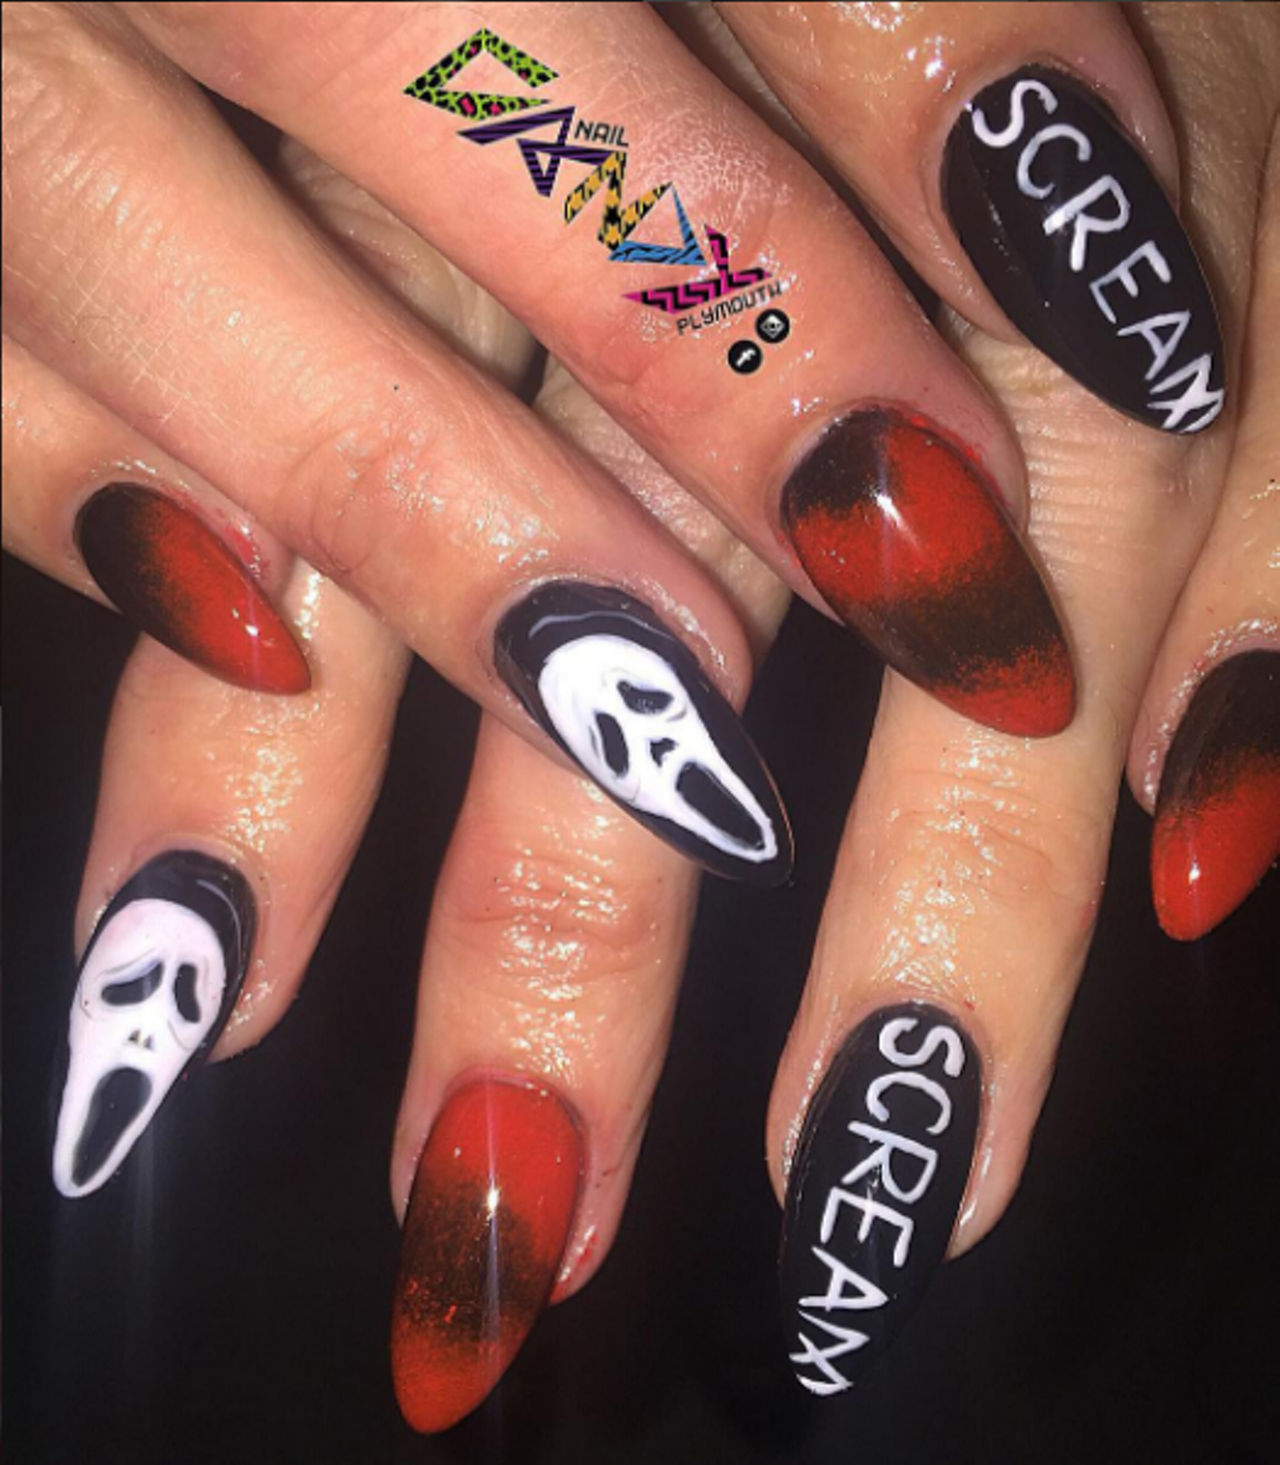 @nailcandyplymouth's favorite scary movie is scream. What's yours?